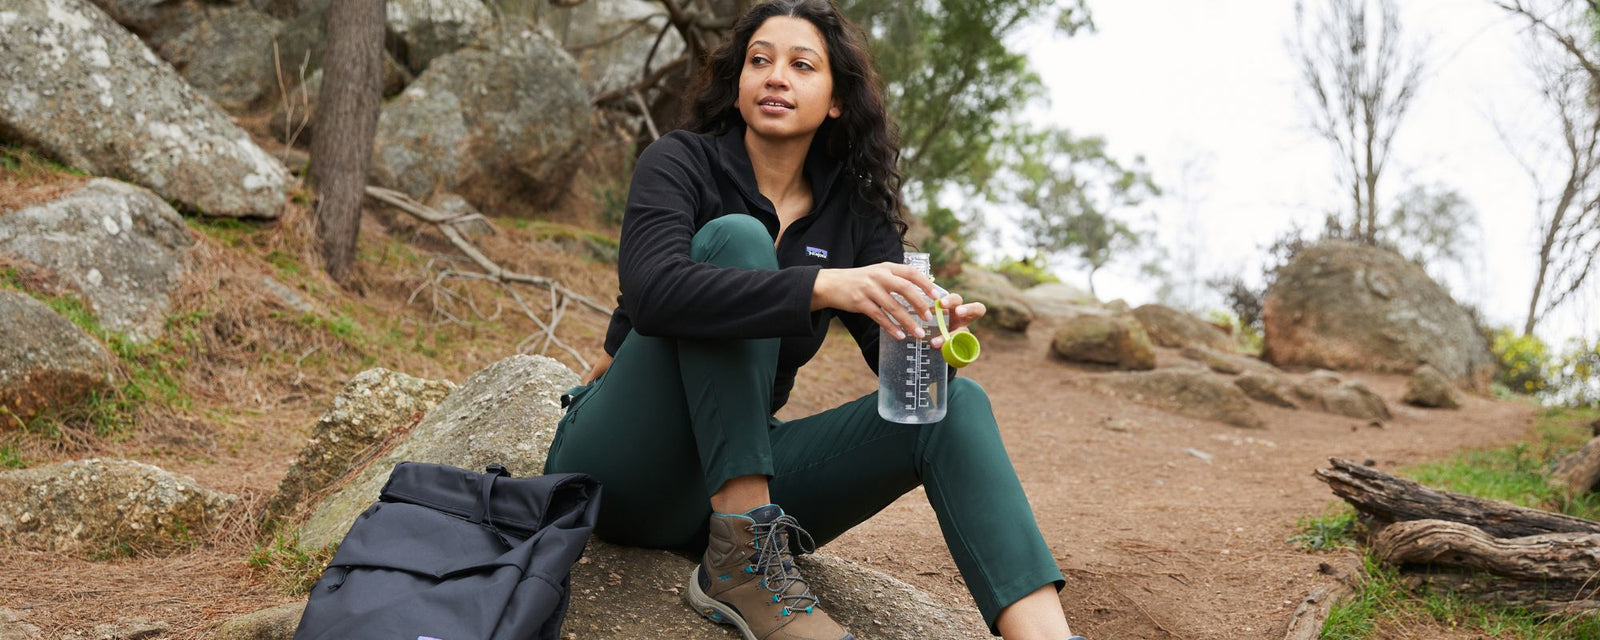 Hiking Pants  Sustainably Made Women's Outdoors Pants - Amble